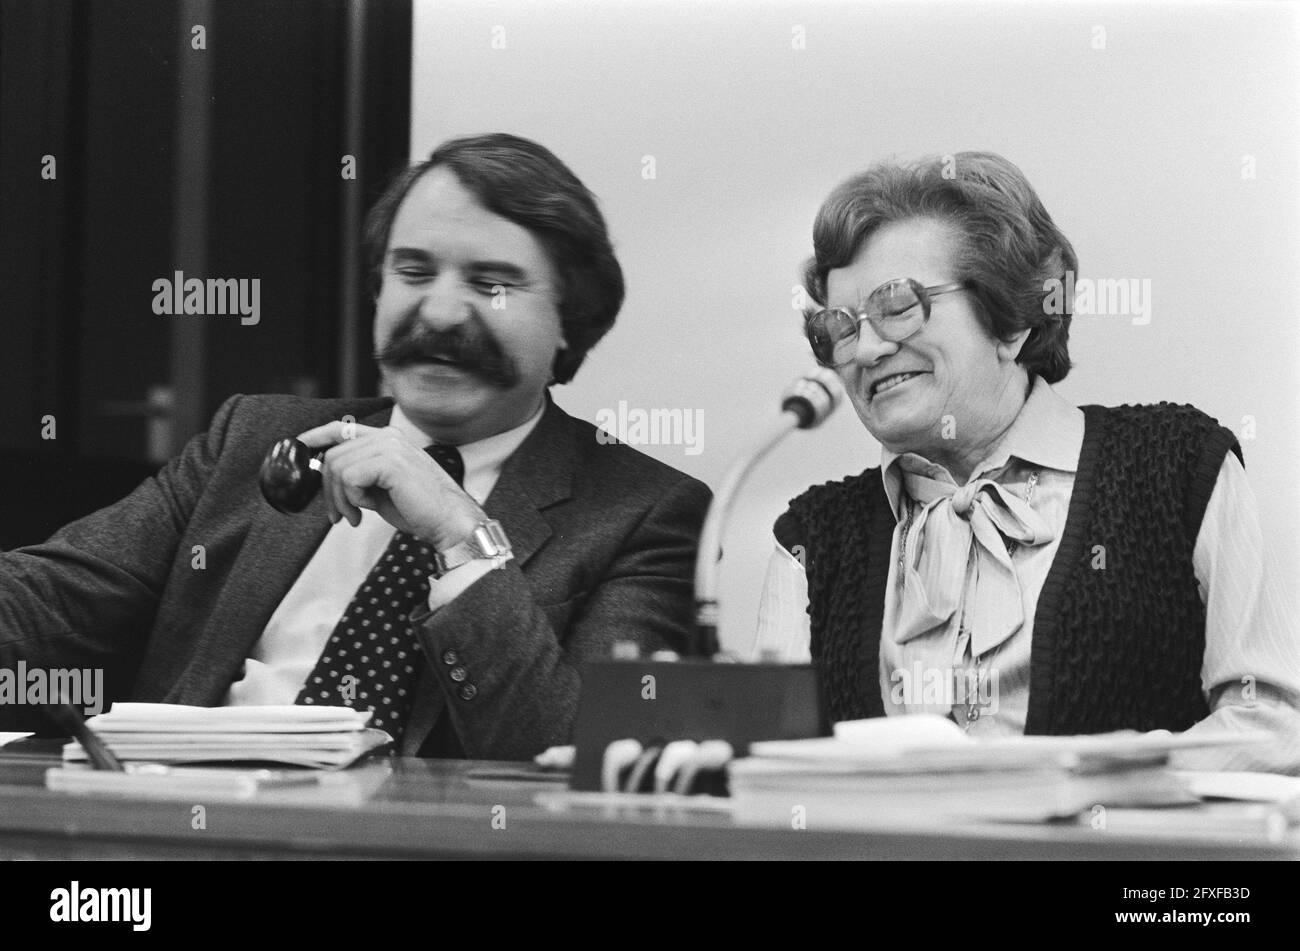 Lower House. Minister Van der Louw (l.) and Mrs. Cornelissen, April 19, 1982, politicians, The Netherlands, 20th century press agency photo, news to remember, documentary, historic photography 1945-1990, visual stories, human history of the Twentieth Century, capturing moments in time Stock Photo